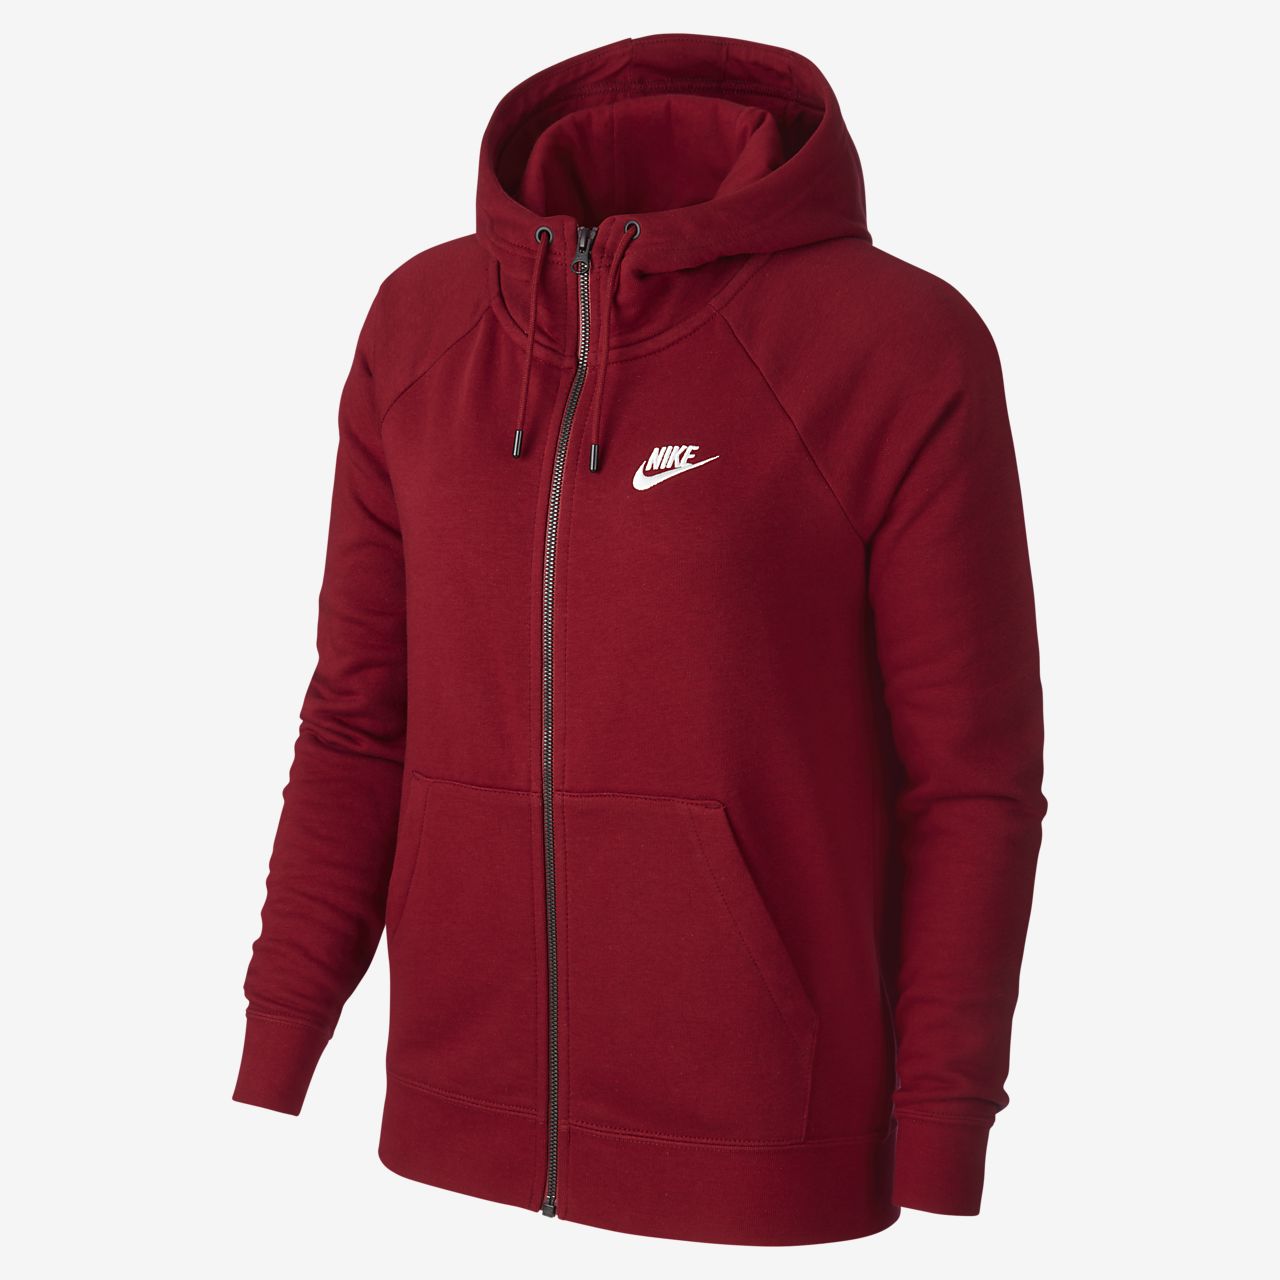 Loosen up in the Nike Sportswear Essential Hoodie (Plus Size), your go-to sweatshirt for all-day comfort.Made with soft semi-brushed fleece, it features an adjustable hood and a kangaroo pocket.Comfy Feel.Semi-brushed fleece fabric has a soft, lightweight feel perfect for everyday wear.Storage on the Go.A kangaroo pocket stores your stuff/5(11).